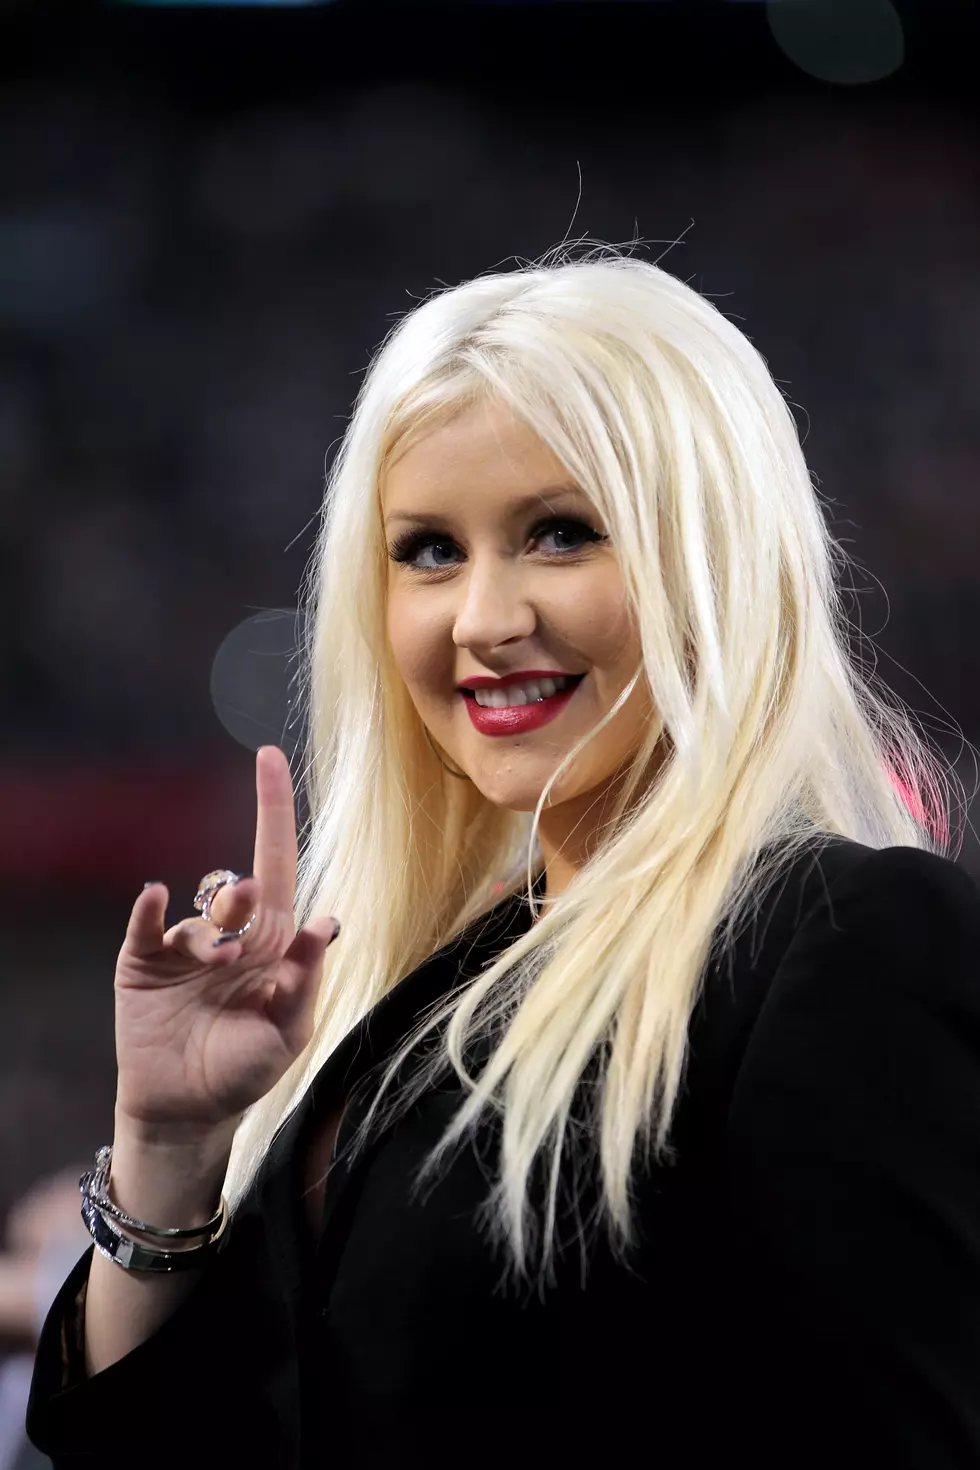 Christina Aguilera arrested for public drunkenness – Yahoo! News